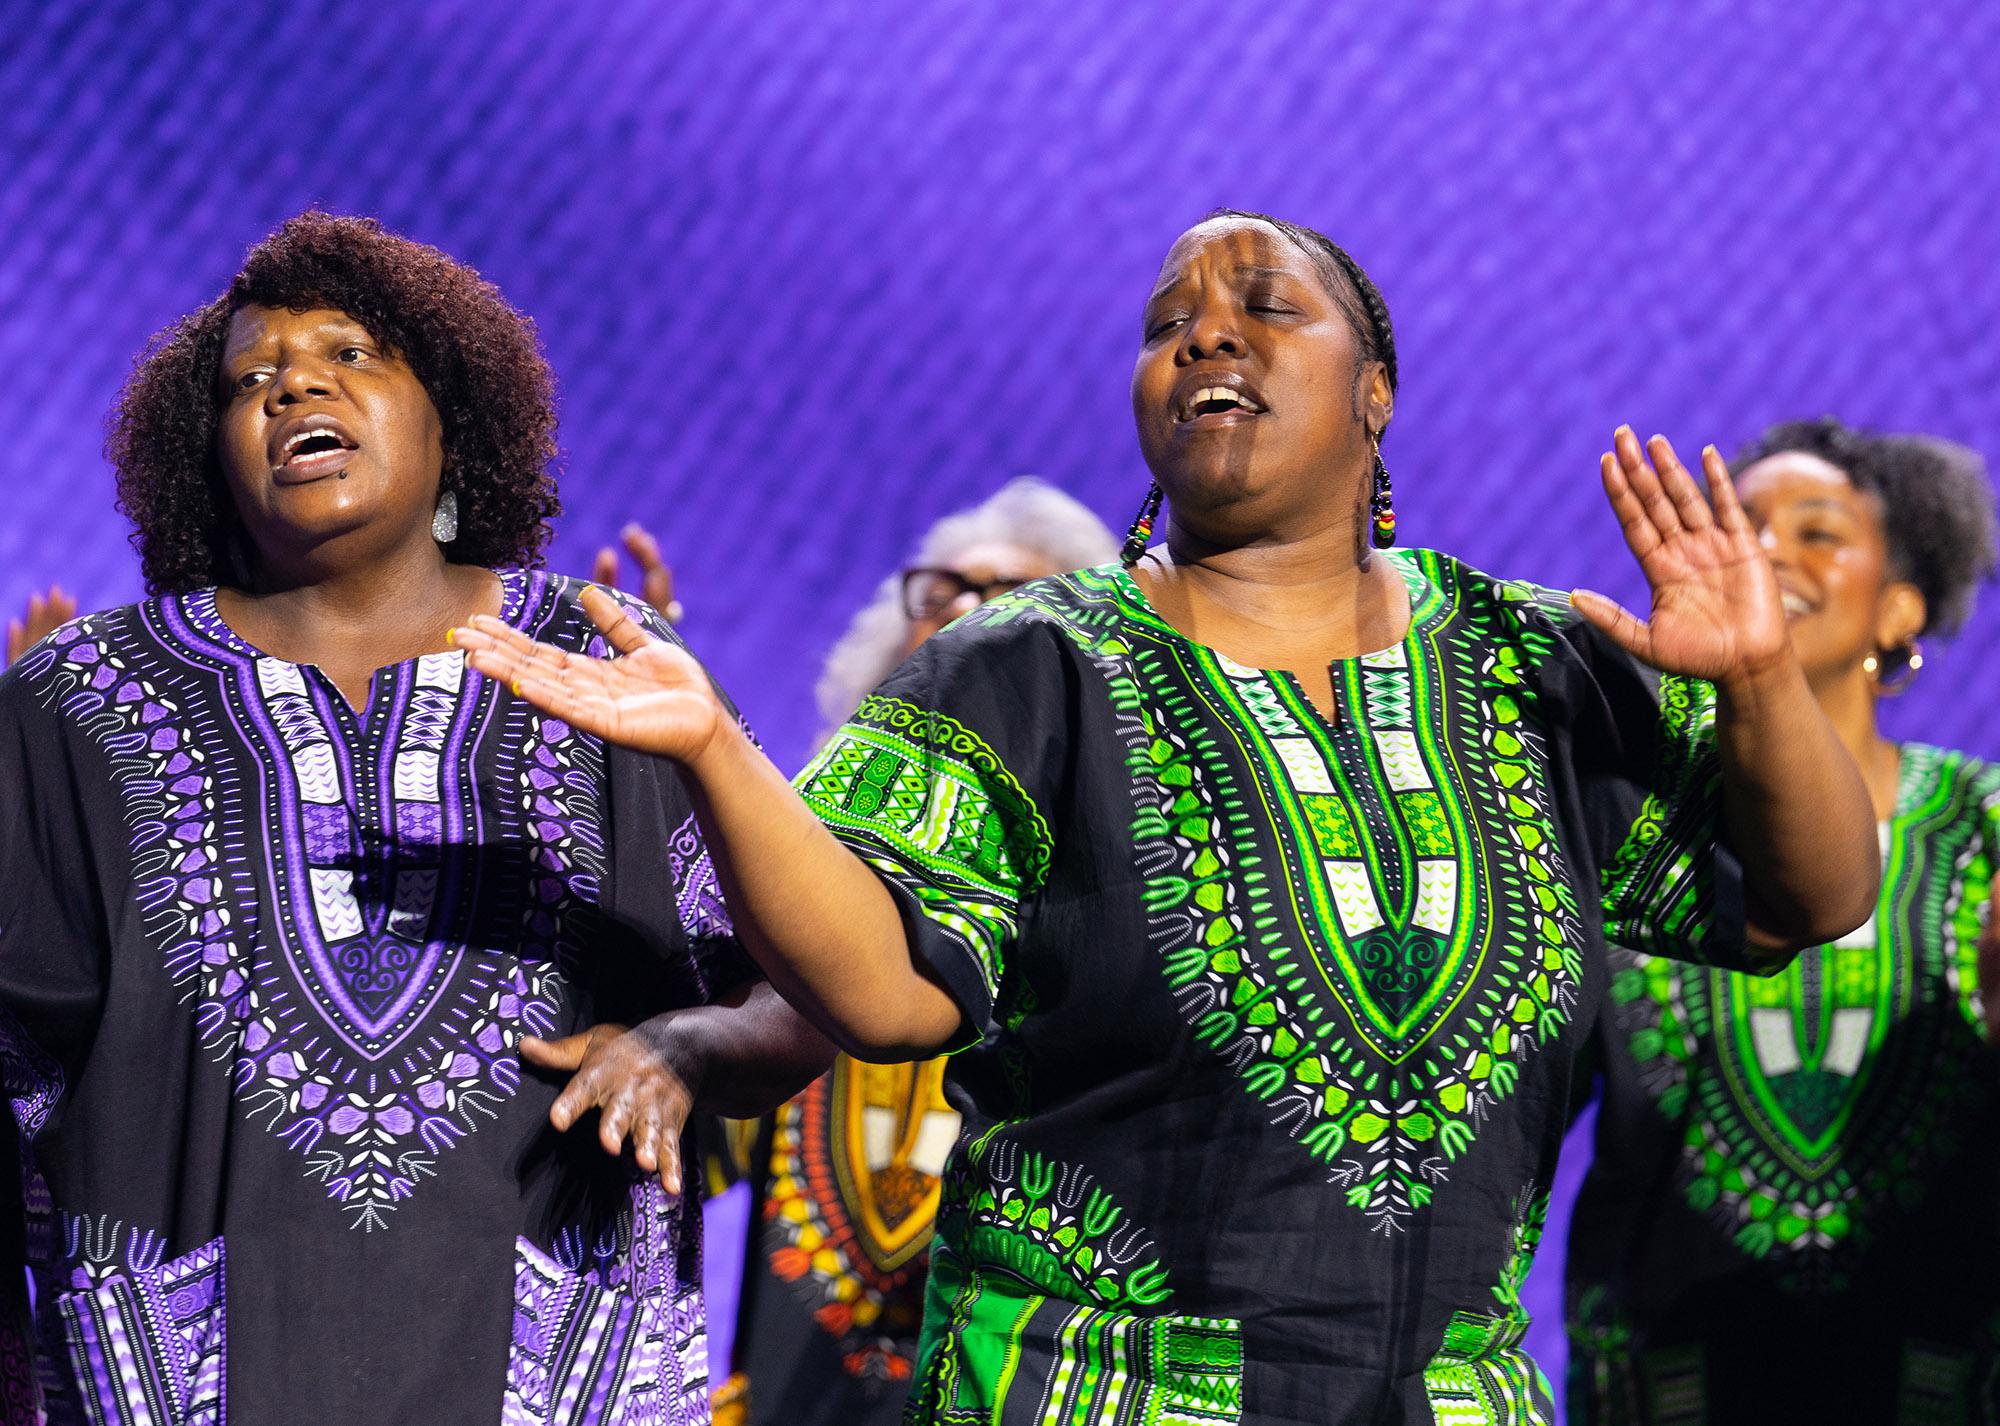 The St. Thomas Gospel Choir opens the first day’s General Session at Apartmentalize.